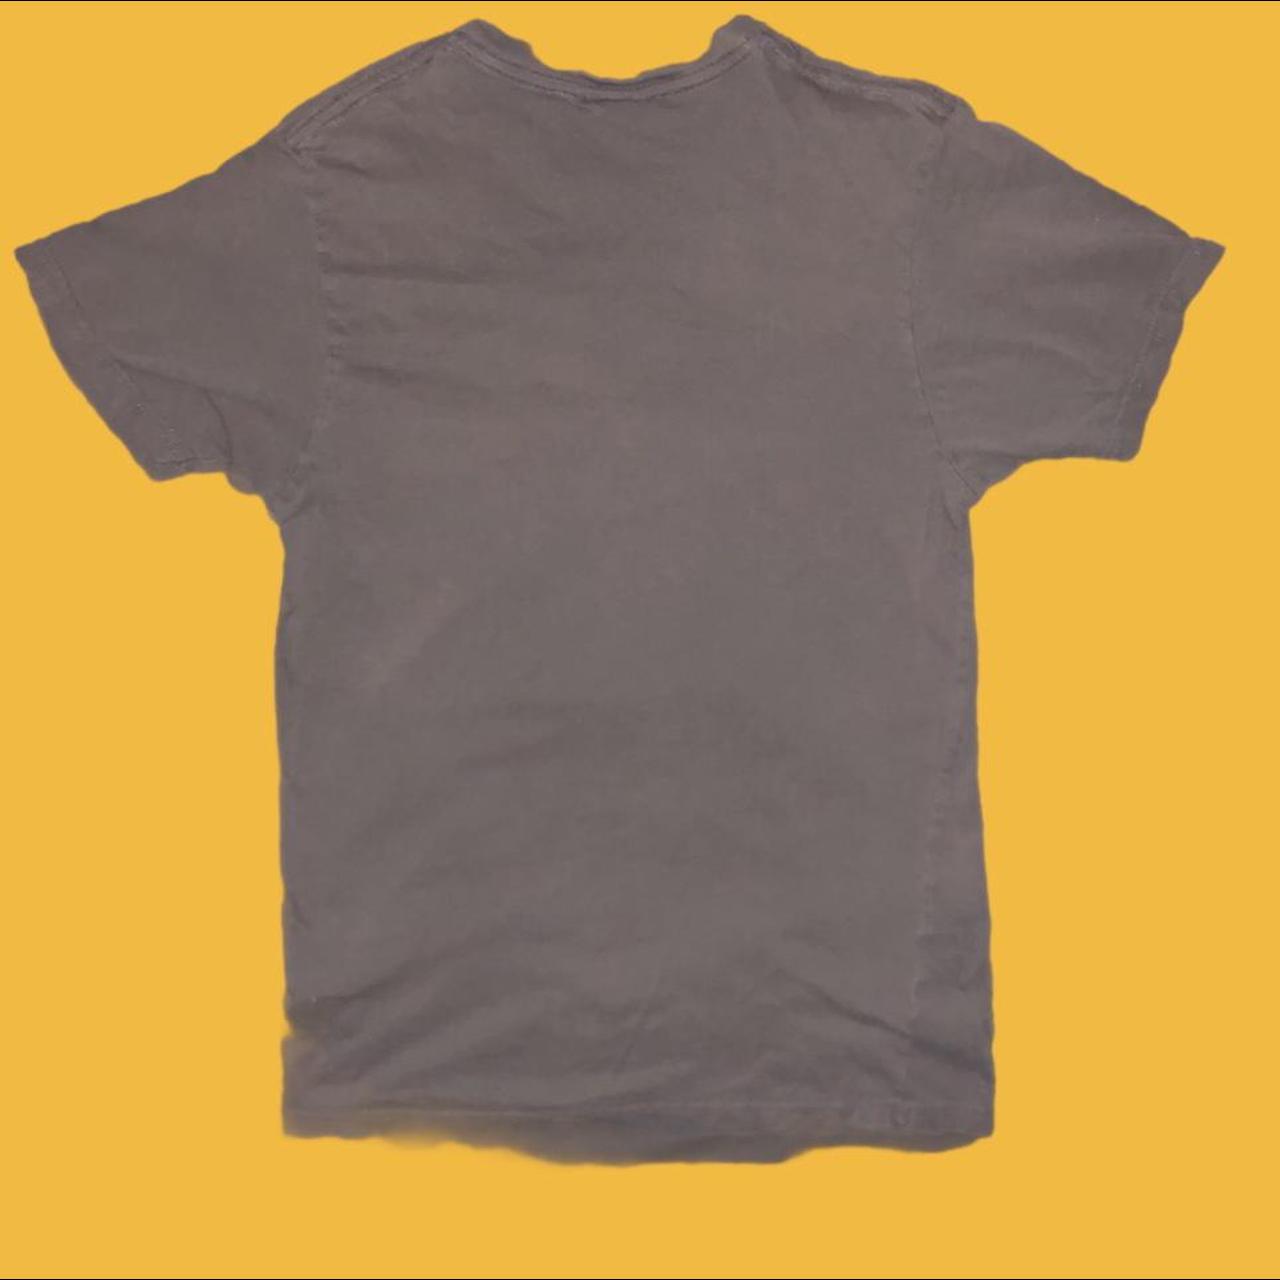 Product Image 2 - Volcom Tee 

No tag, likely